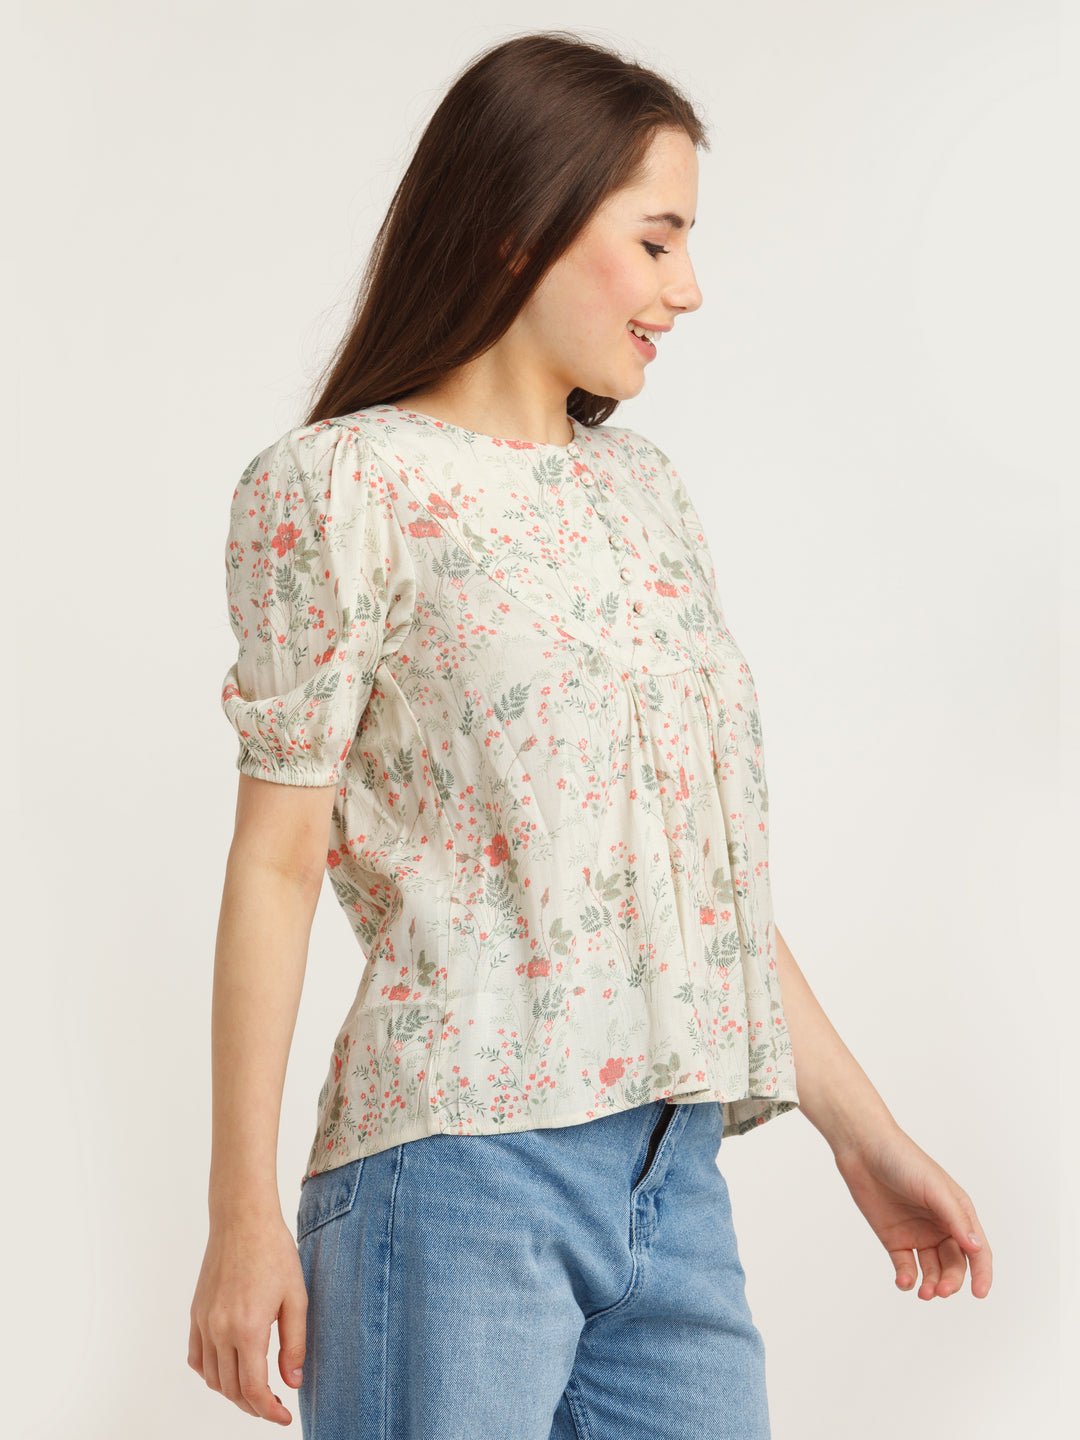 Beige Printed Gathered Top For Women